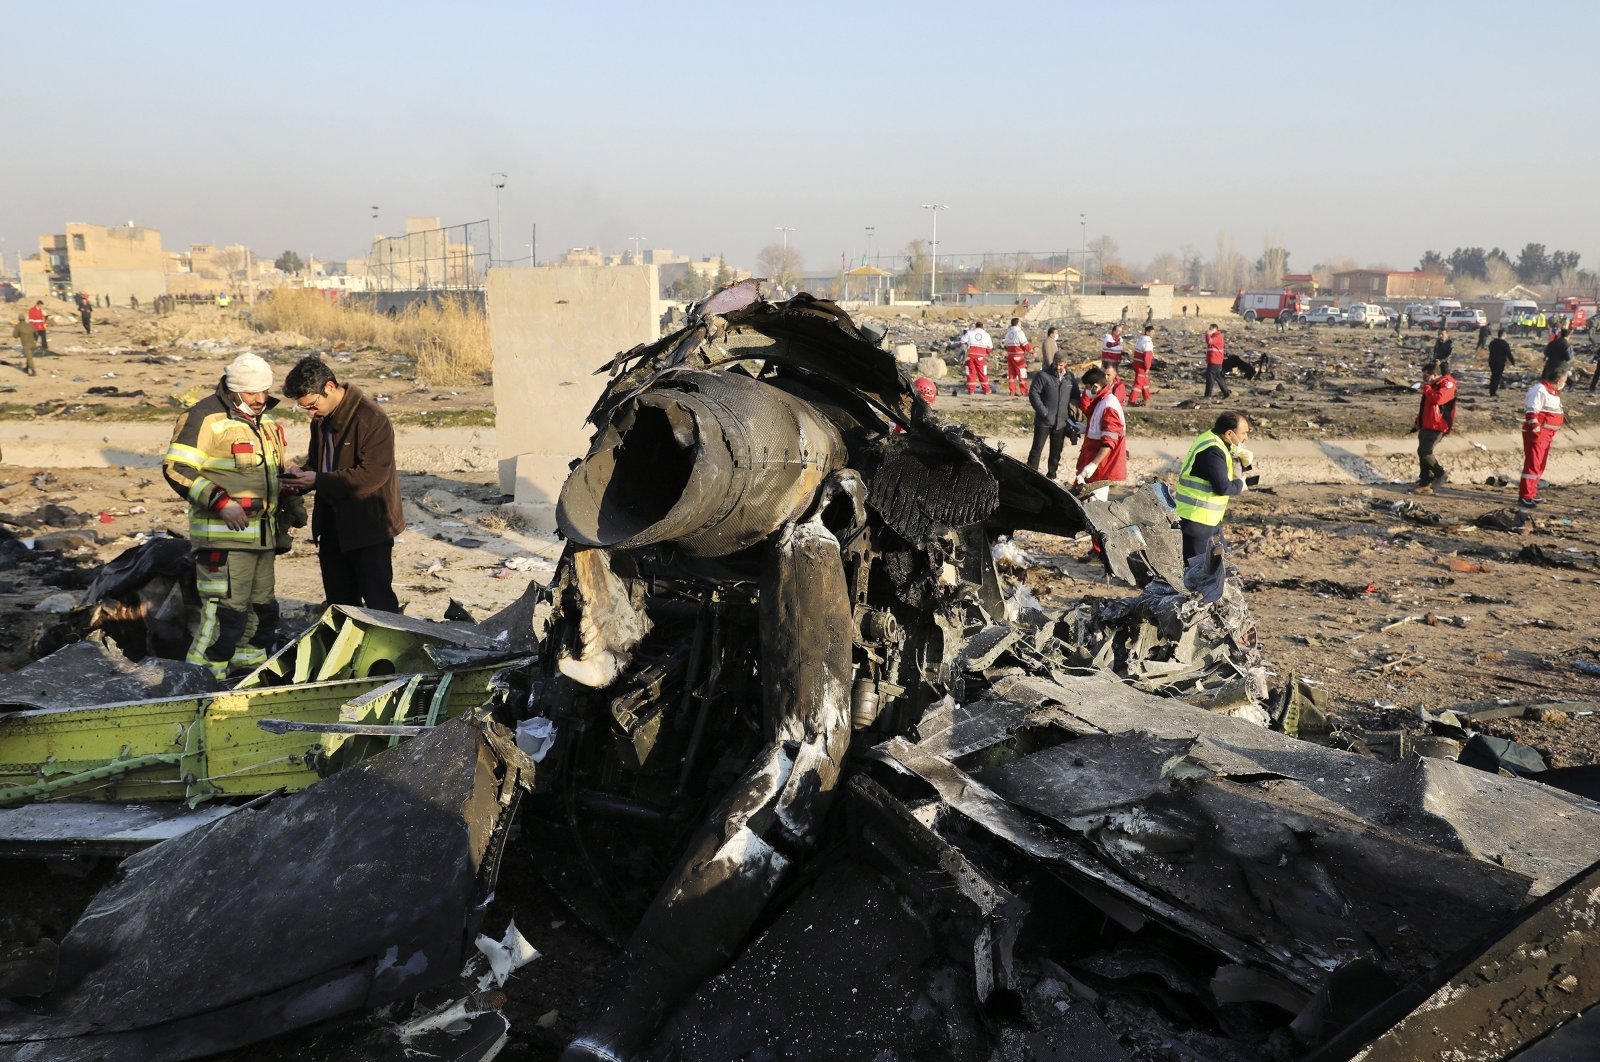 Investigators inspect the debris at the scene where the Ukrainian plane crashed after being shot down in Shahedshahr southwest of the capital Tehran, Iran, Jan. 8, 2020. (AP Photo)